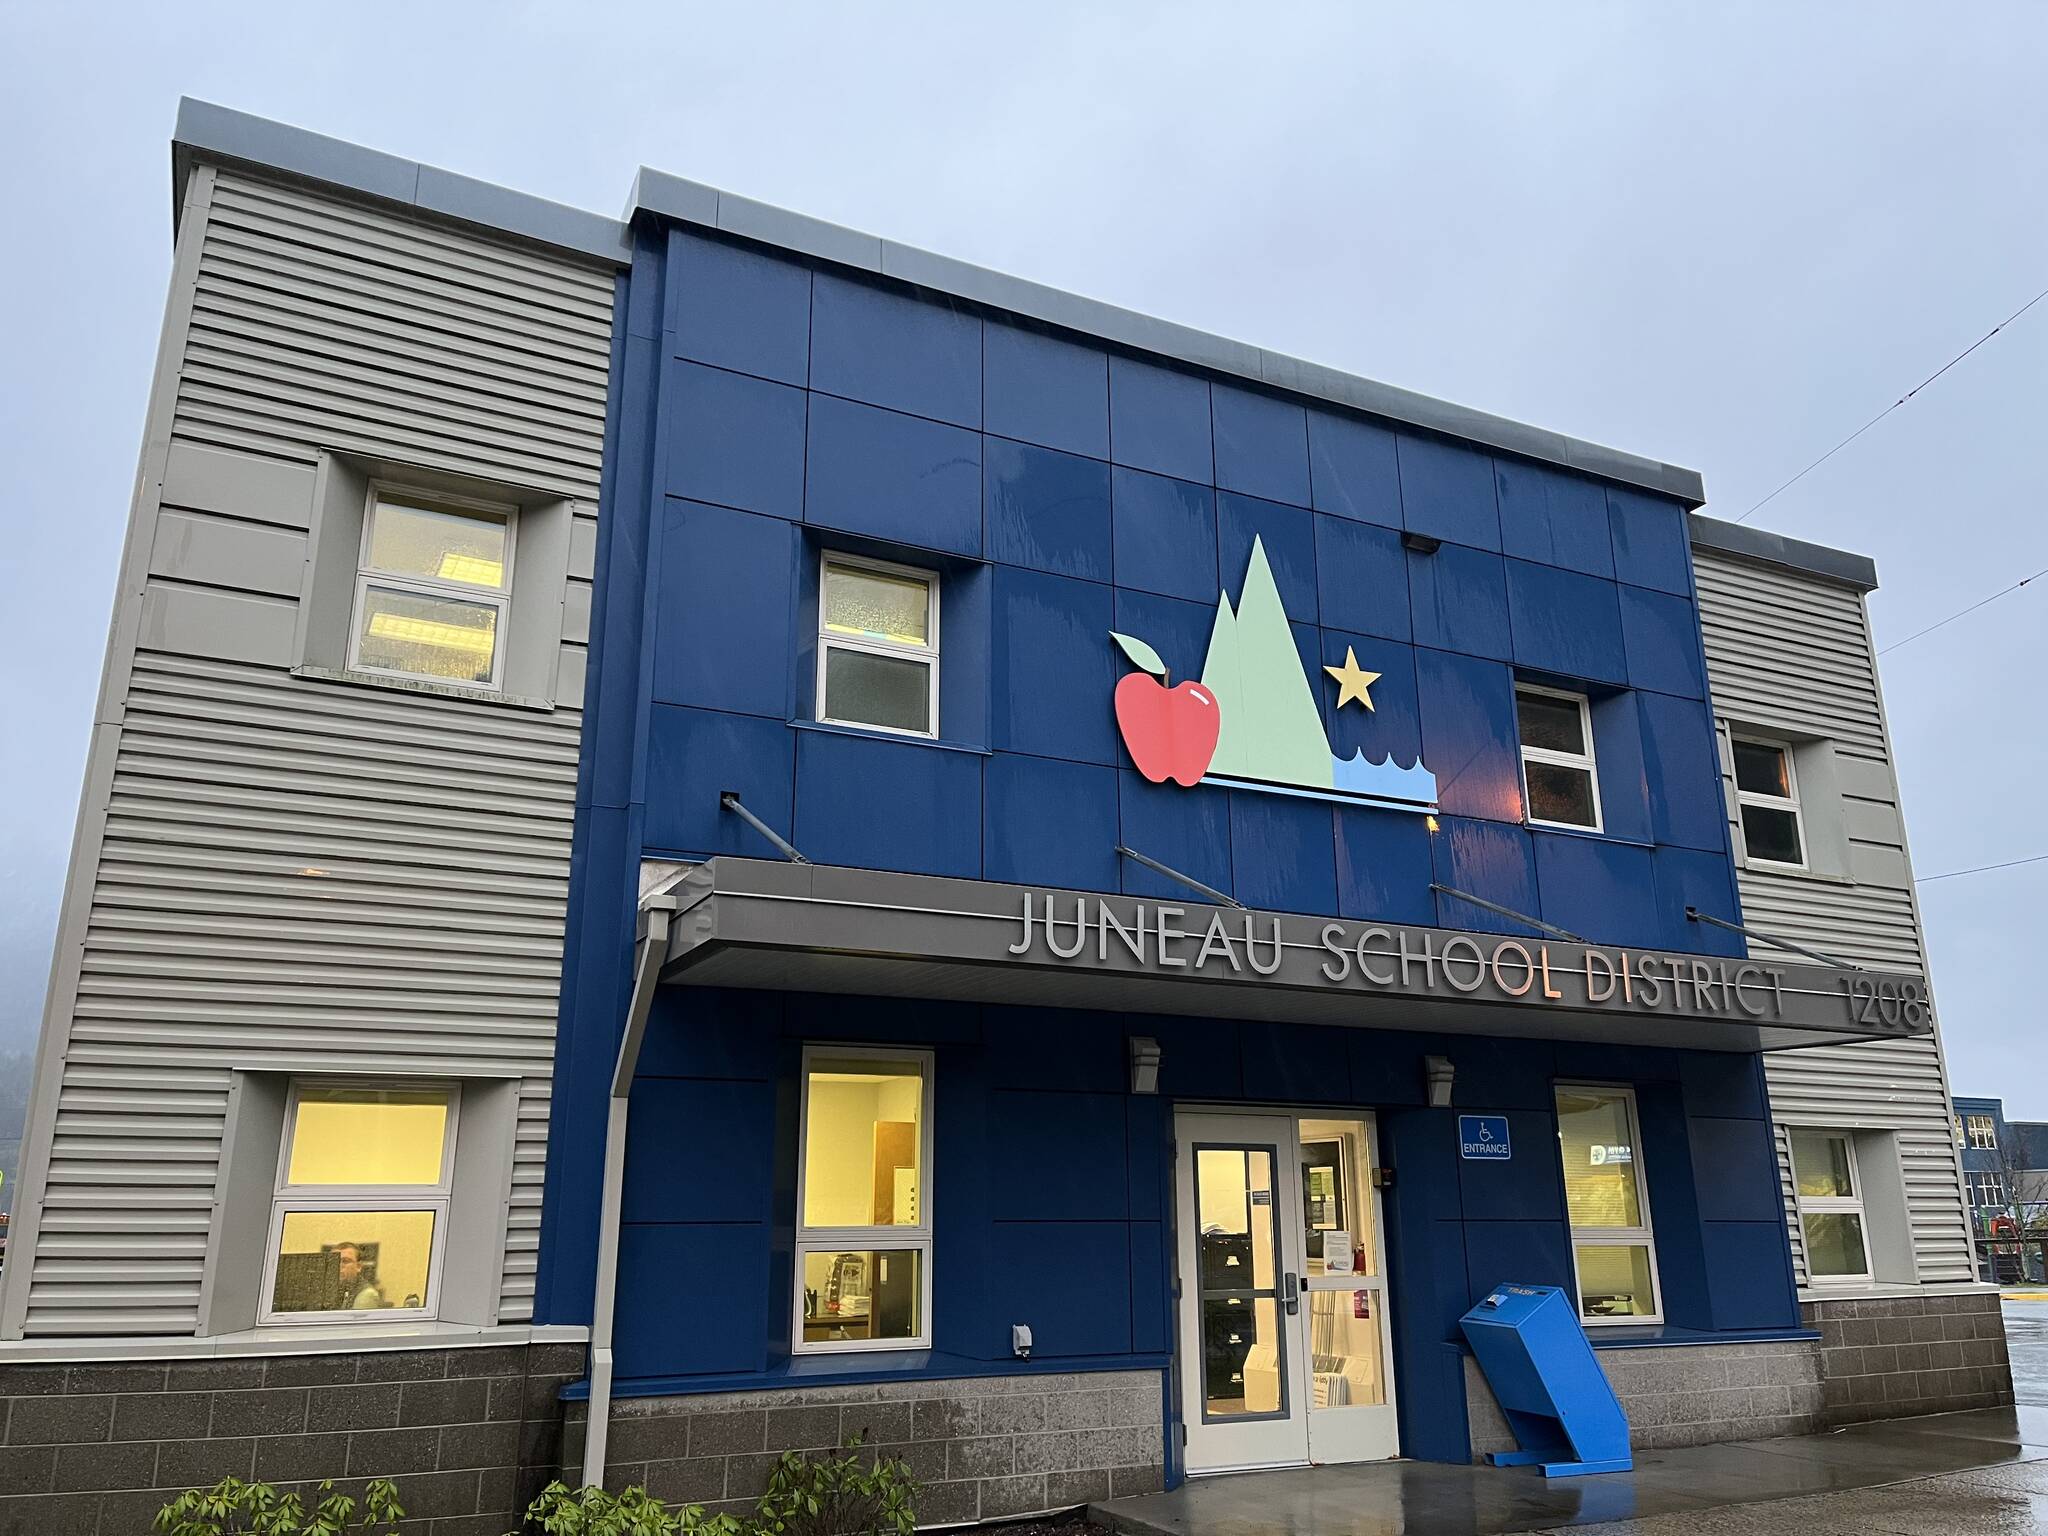 An independent third-party audit found Juneau School District spent at a deficit of over $620,000, in the past fiscal year and failed to adhere to district policies that could have lessened the total. (Jonson Kuhn / Juneau Empire File)
An independent third-party audit found Juneau School District spent at a deficit of over $620,000 and will need to figure out a way to replenish the fund deficit and balance its budget before the next budgeting cycle starting June 30, 2023. (Jonson Kuhn / Juneau Empire File)